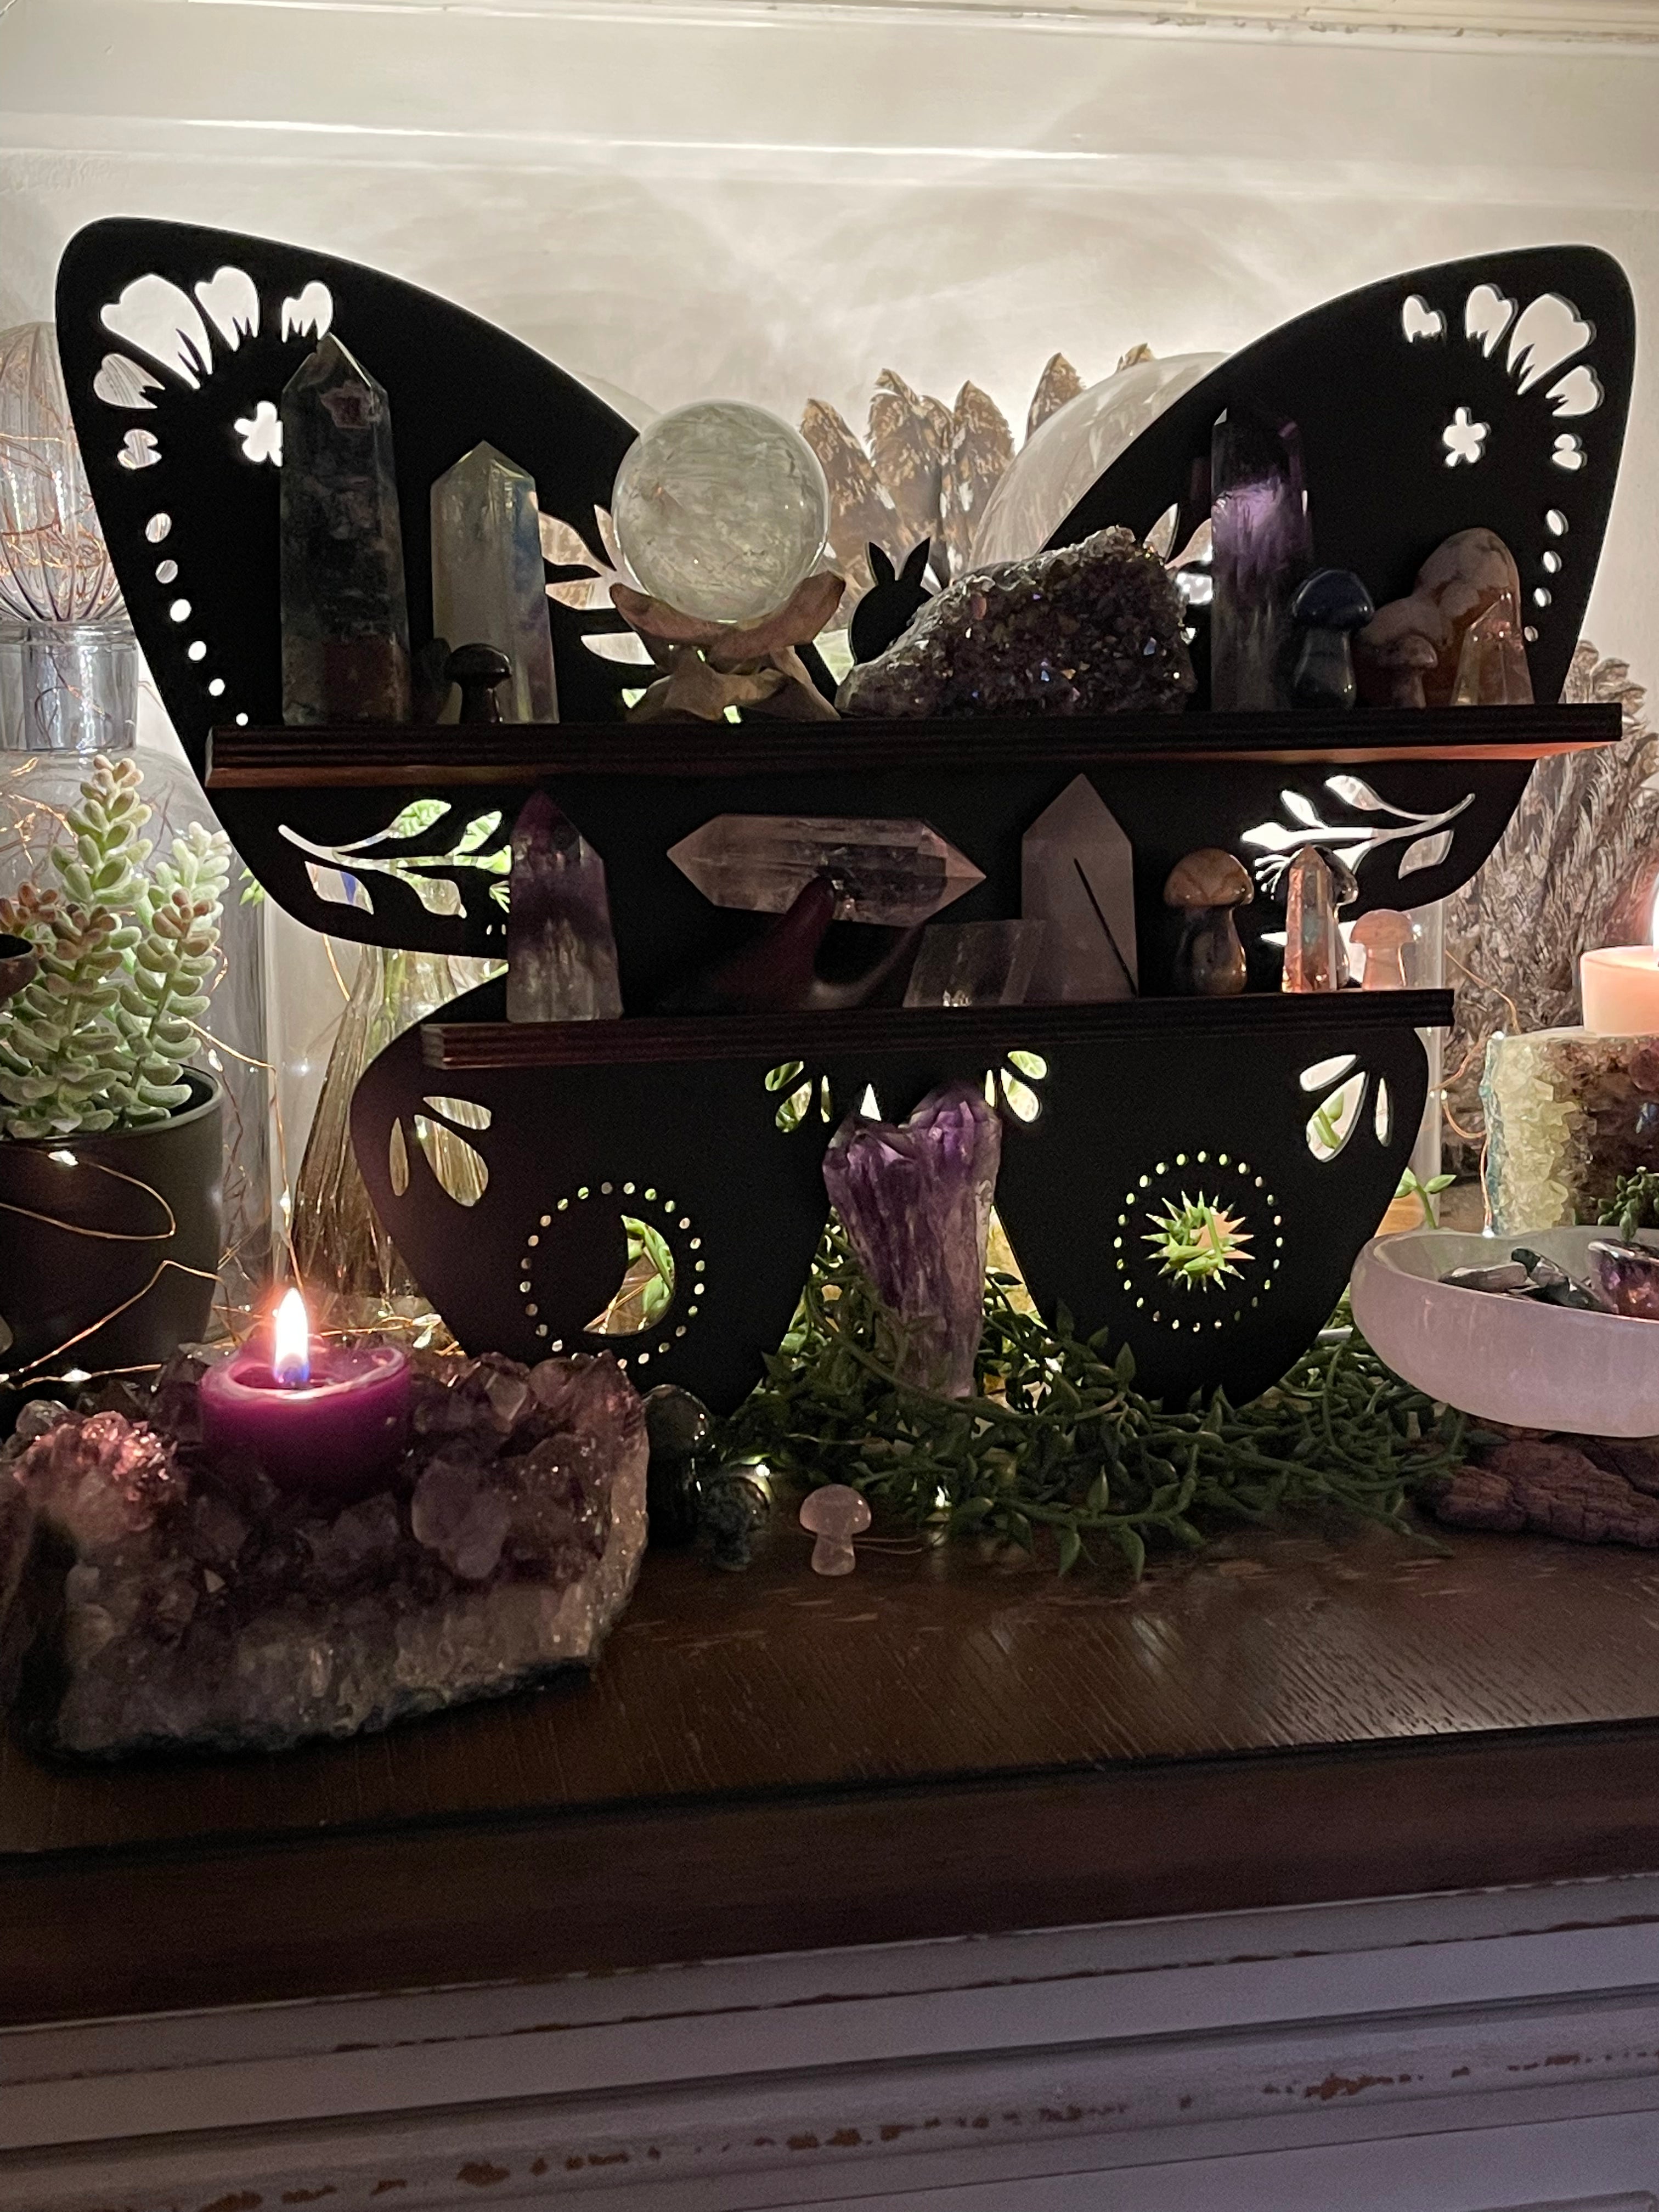 Wooden Butterfly Light Wall Shelf | Wall Hanging | Crystal Collection | Gift Idea